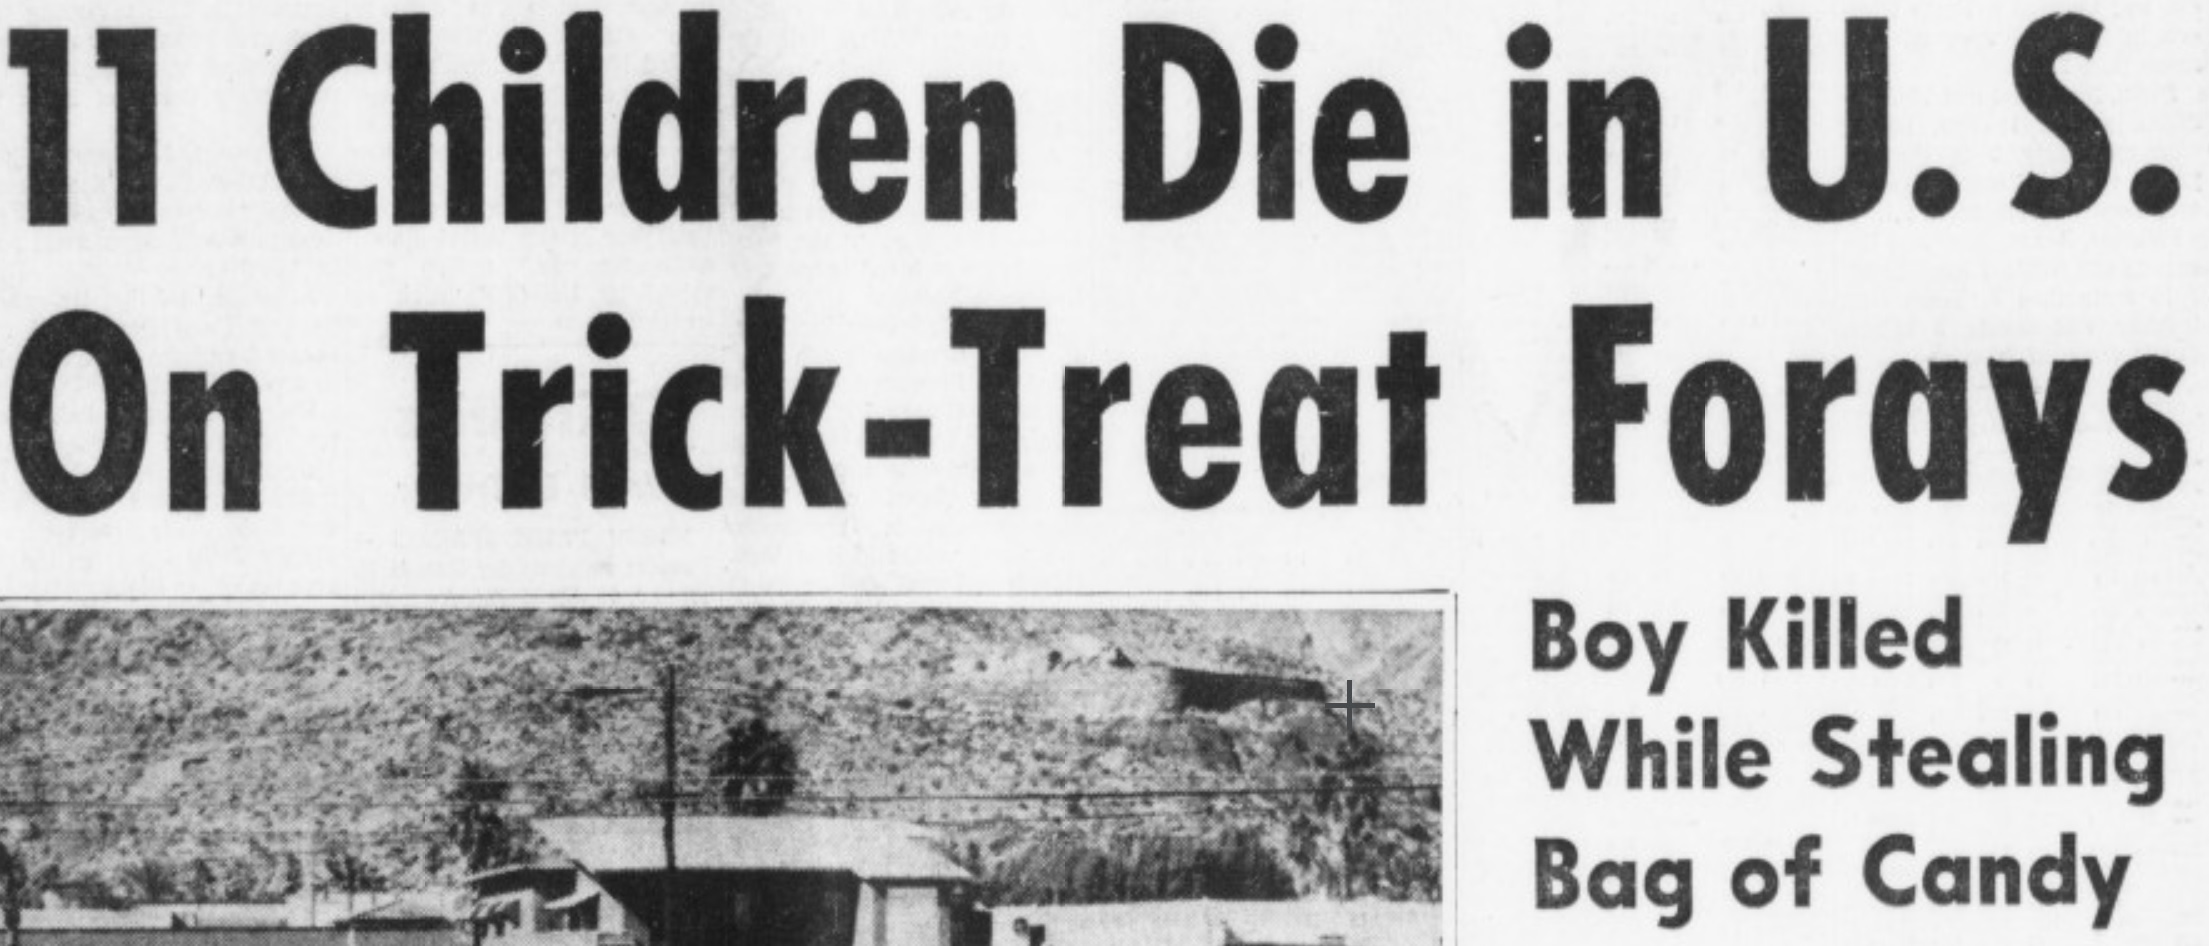 The deadly Halloween of 1967